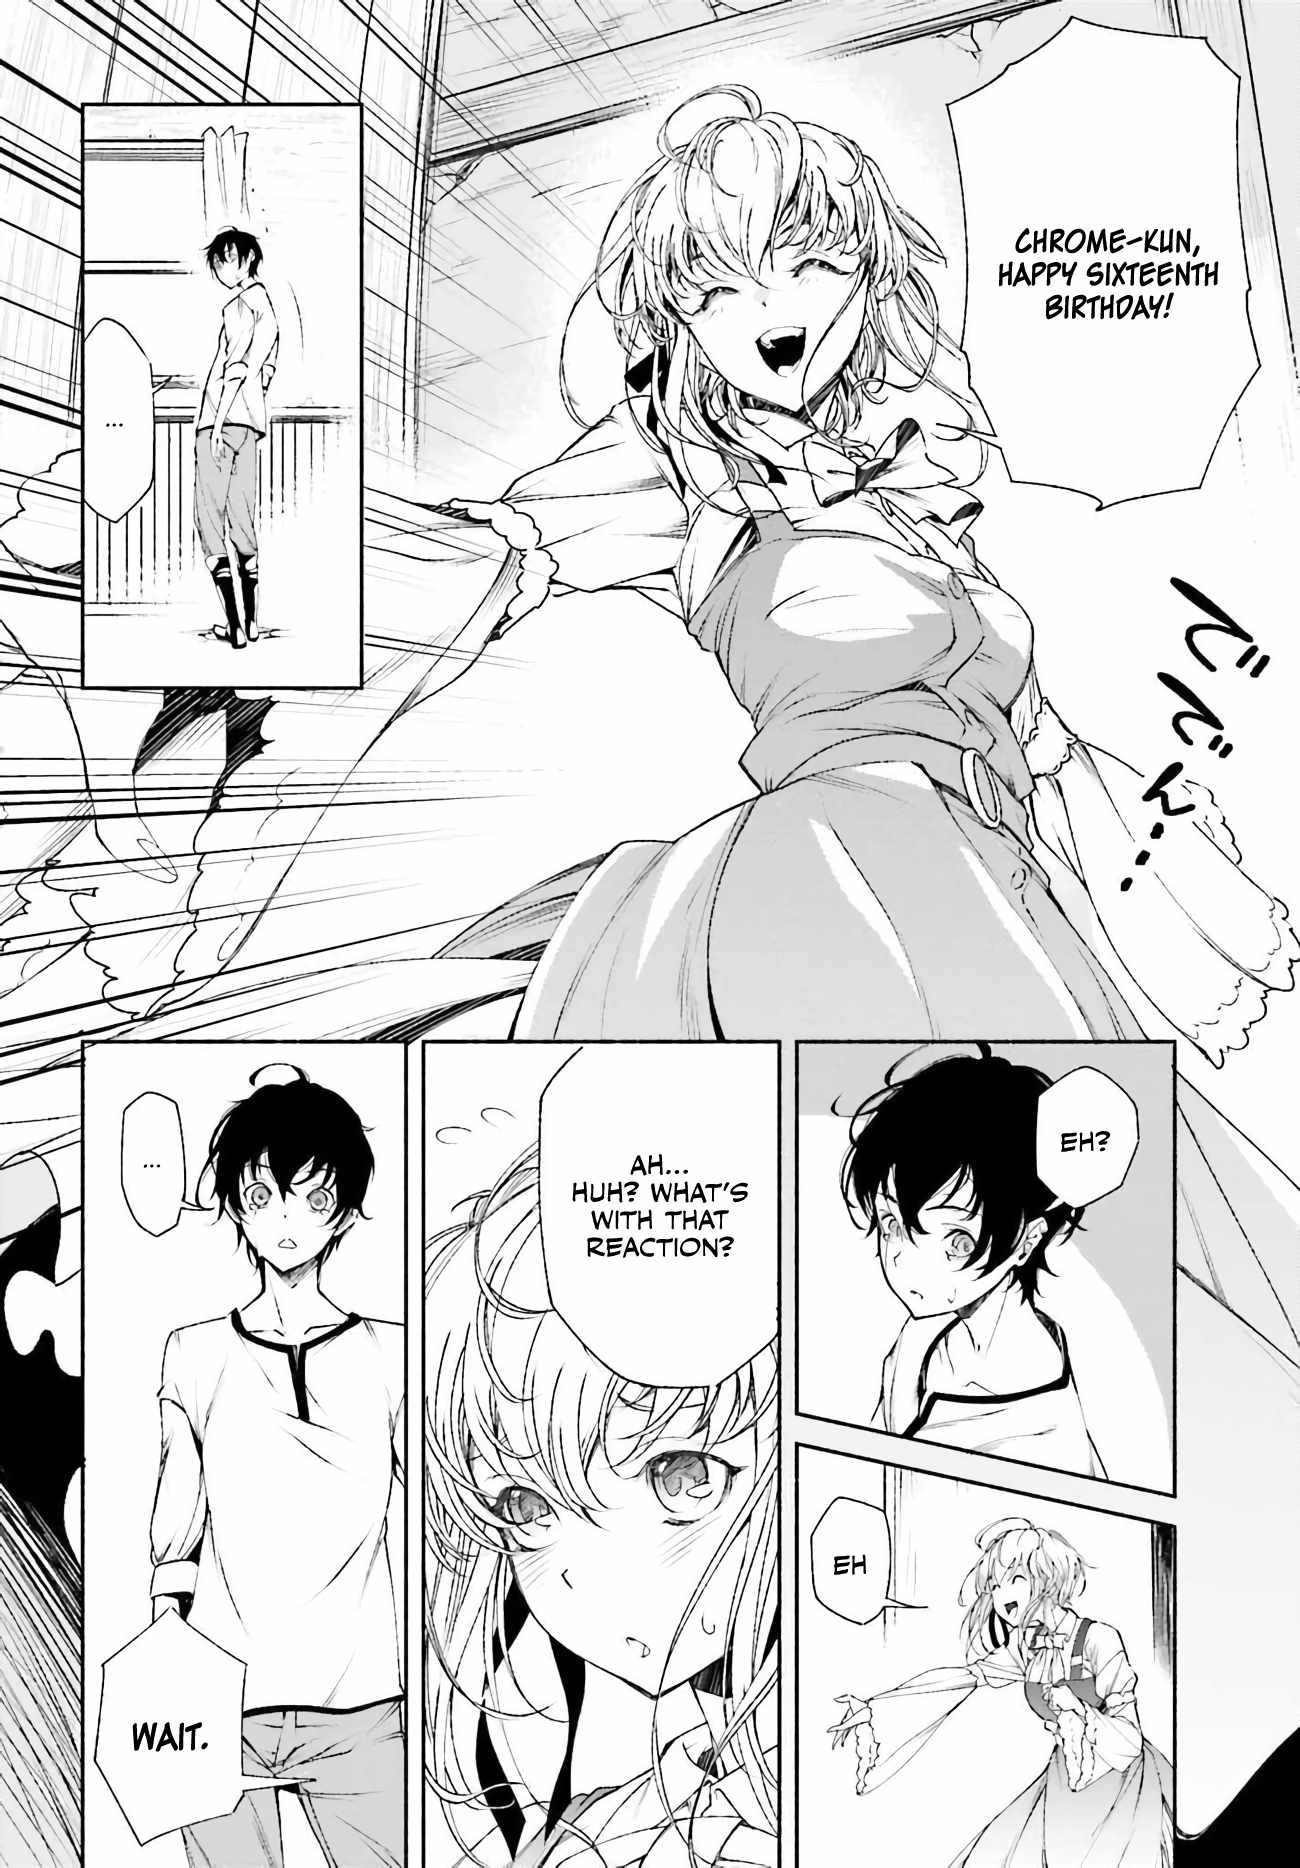 The Time Mage’s Strong New Game ～I Returned to the Past To Rewrite It as the World’s Strongest Chapter 1 - HolyManga.net